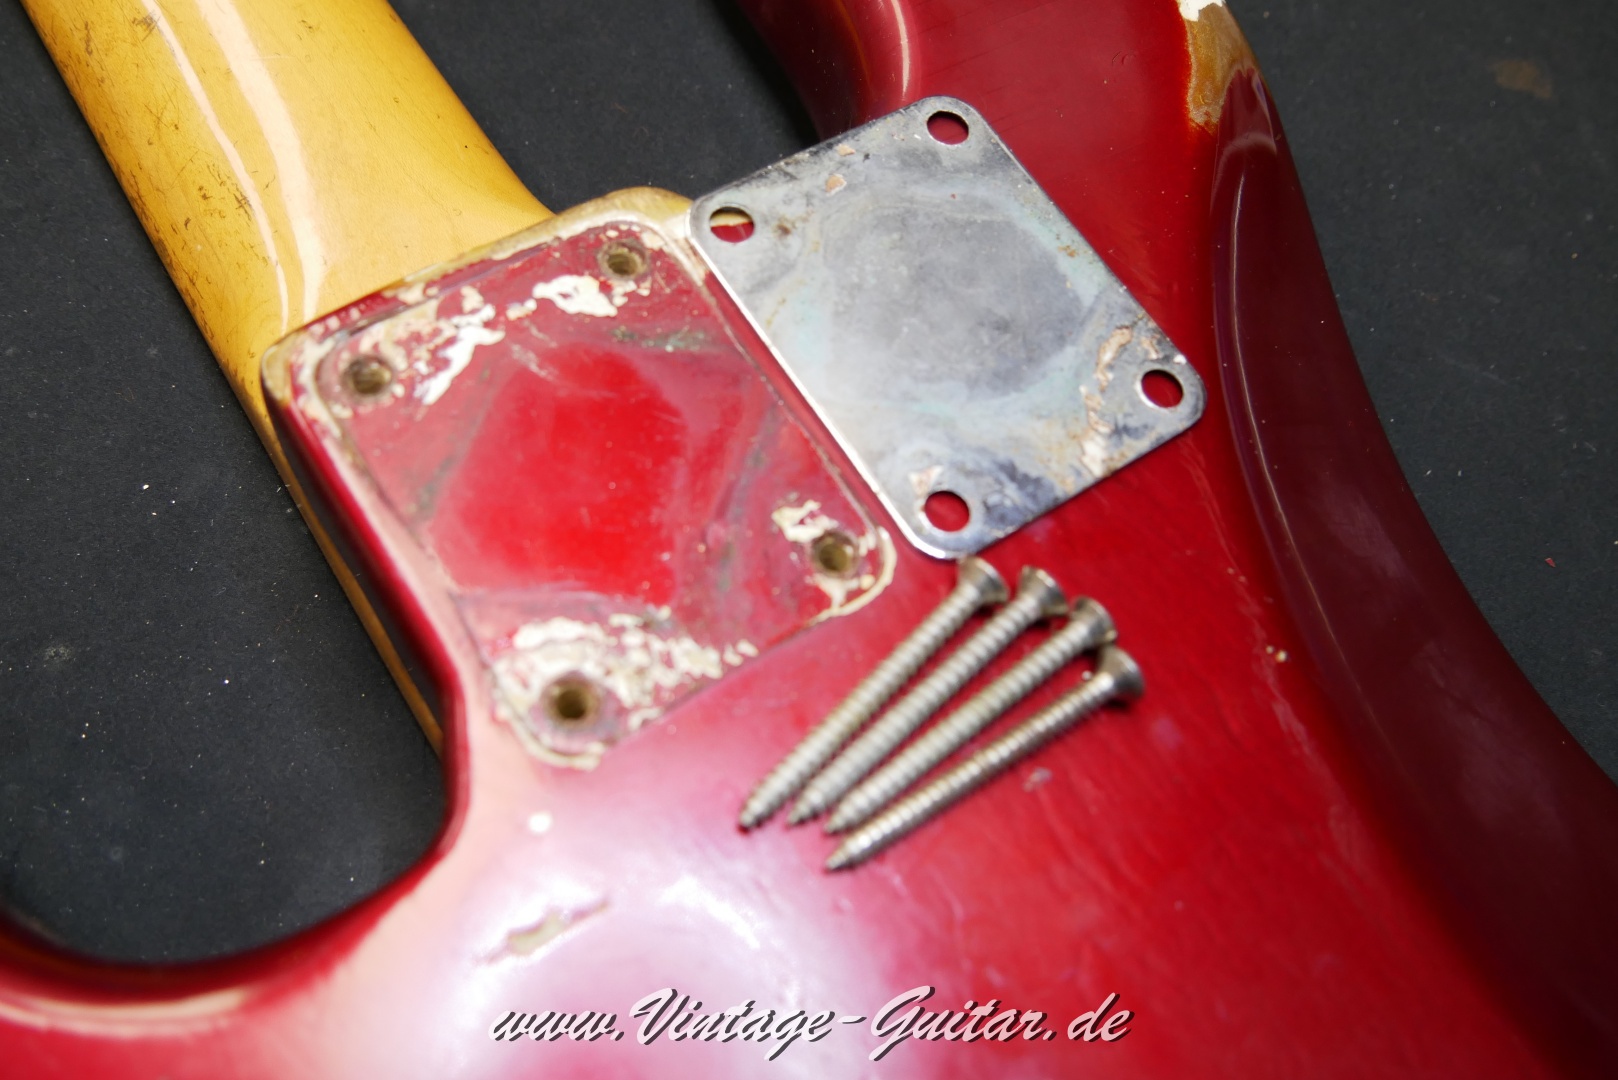 Fender-Precision-Bass-1963-candy-apple-red-023.JPG